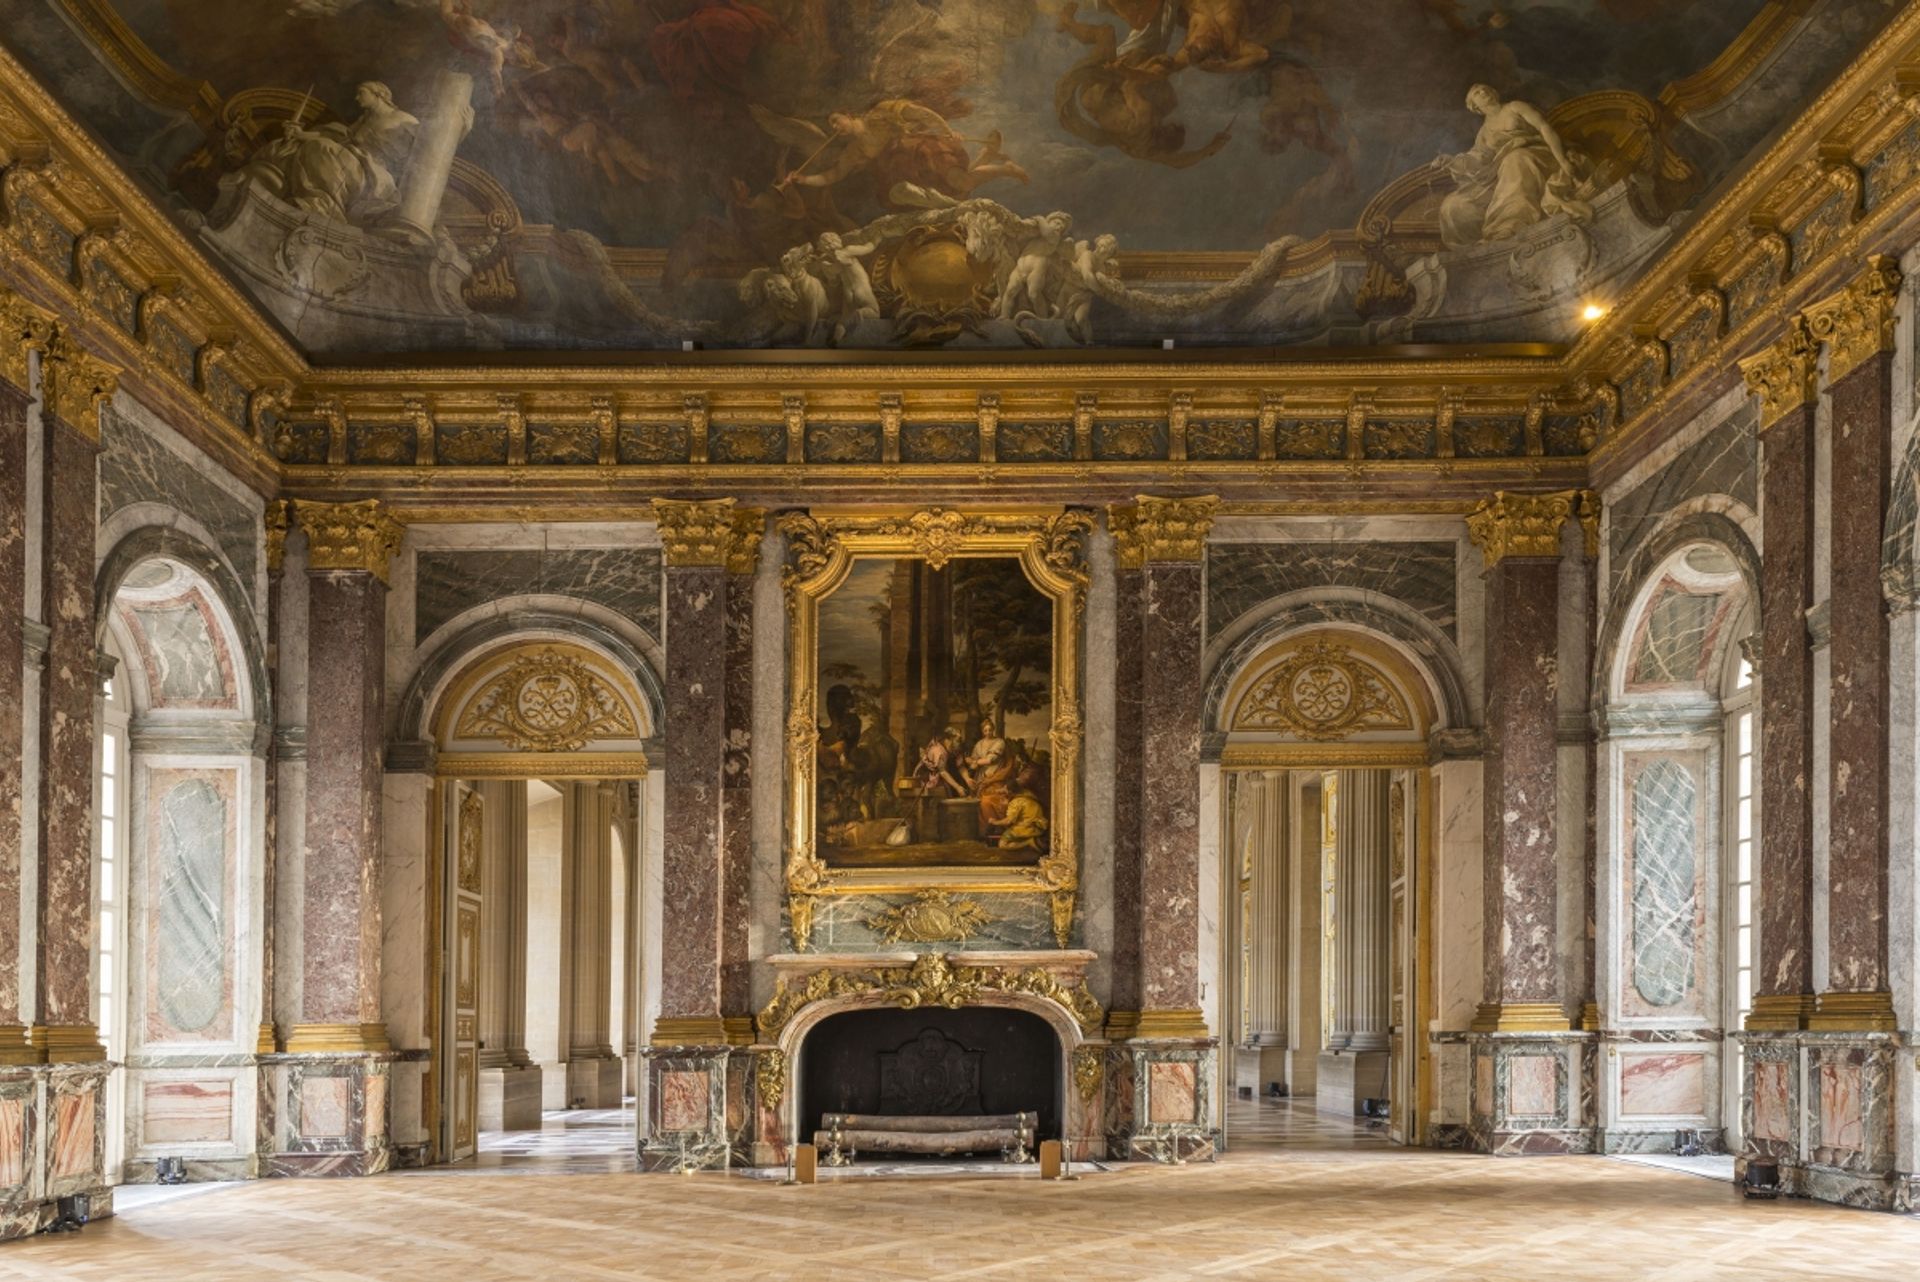 The Room of Abundance at the Palace of Versailles © Chateau de Versailles